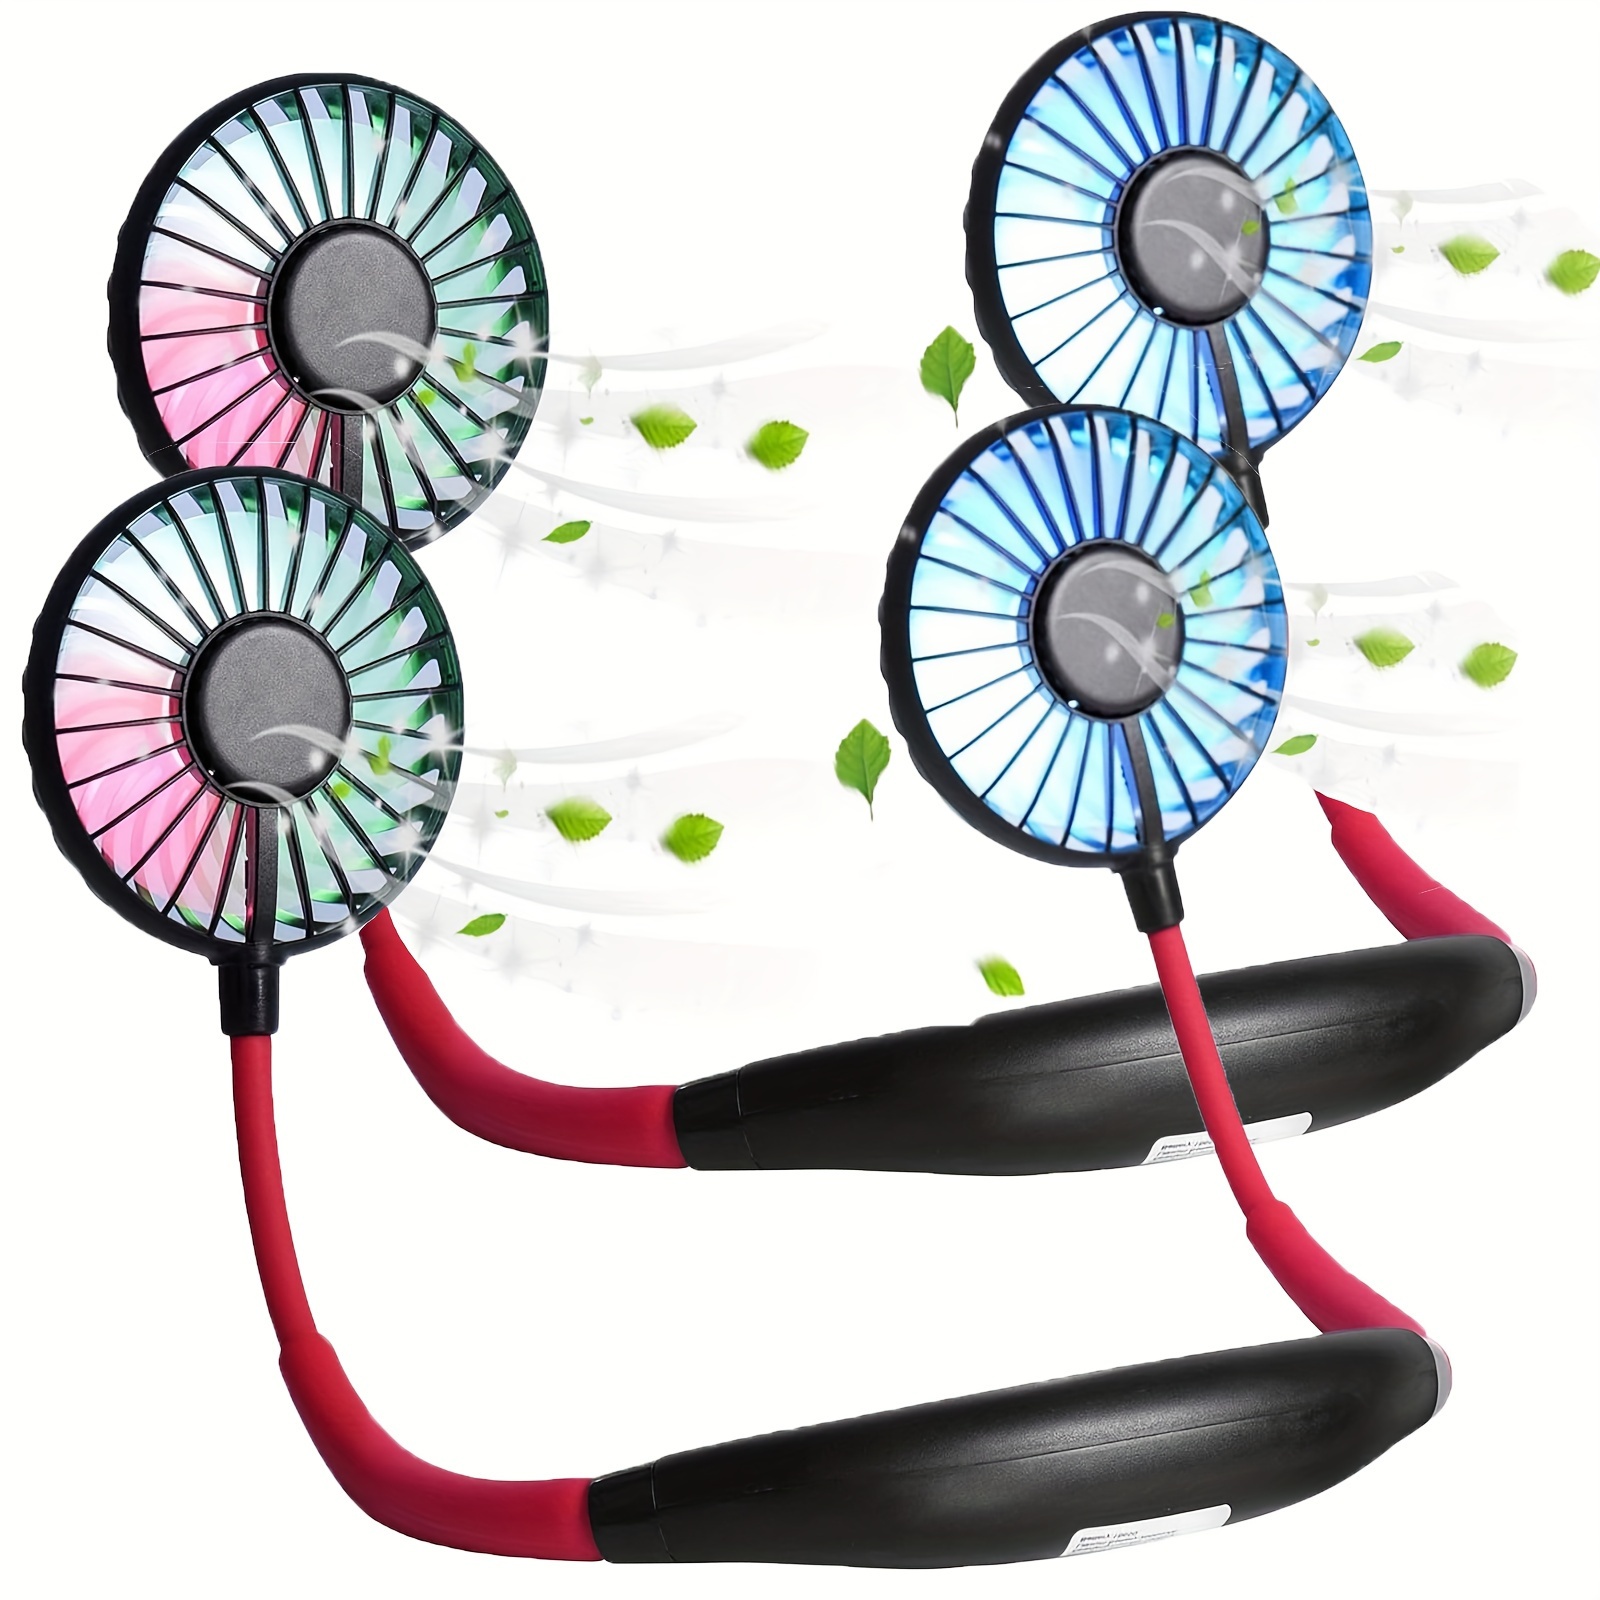 

2 Pcs Upgraded Version Portable Neck Fan, Color Changing Led, With Aromatherapy, 360° Free Rotation, And Lower Noise Strong Airflow Headphone Design For Sport, Office, Home, Outdoor, Travel, Gift